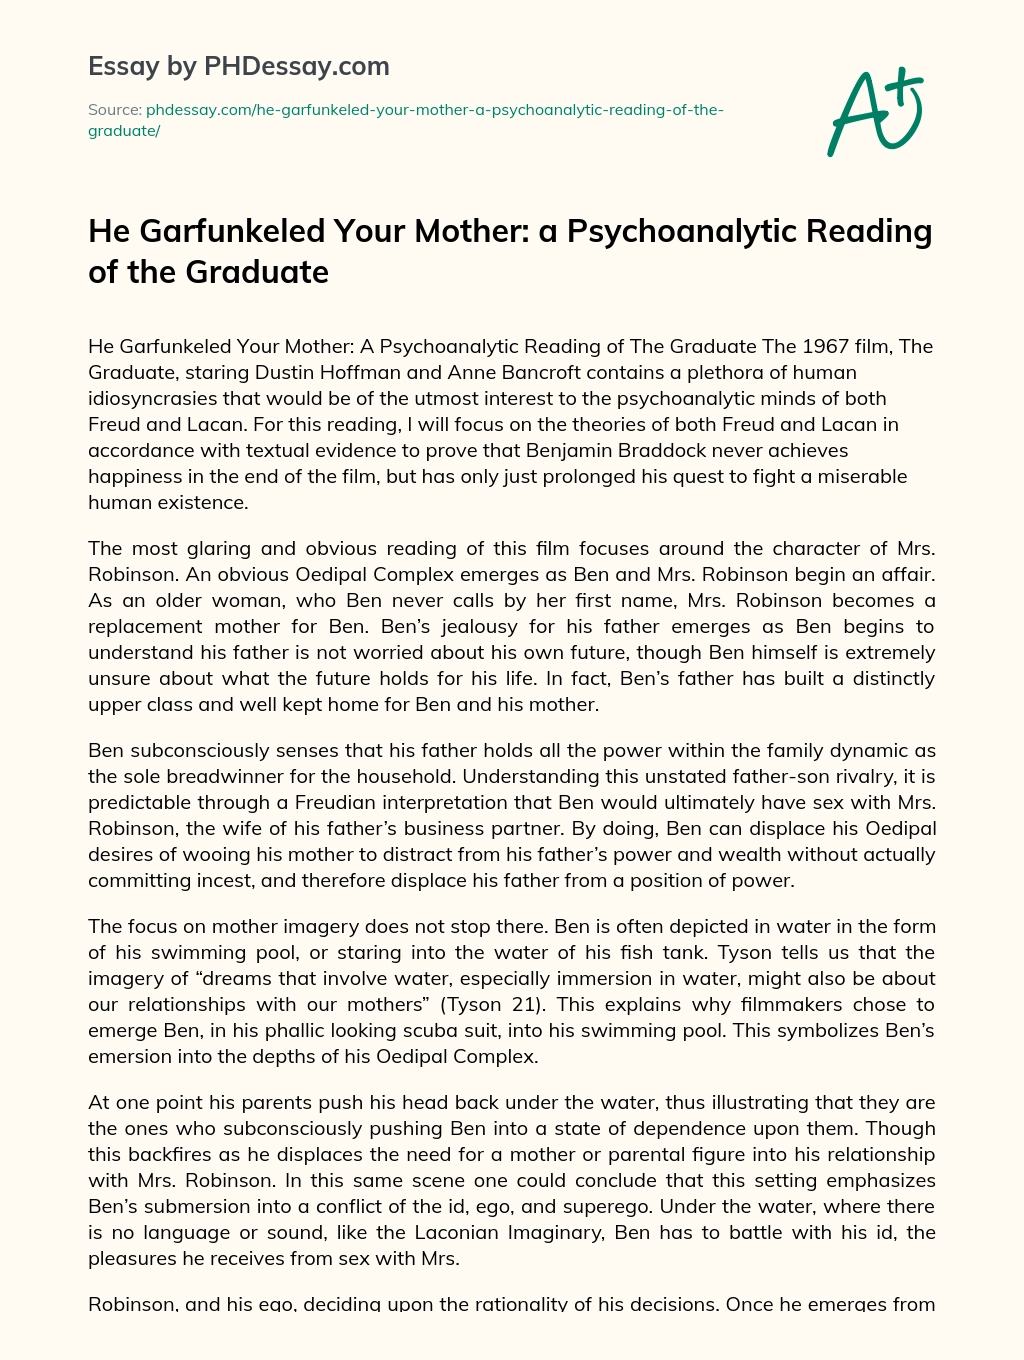 He Garfunkeled Your Mother: a Psychoanalytic Reading of the Graduate essay